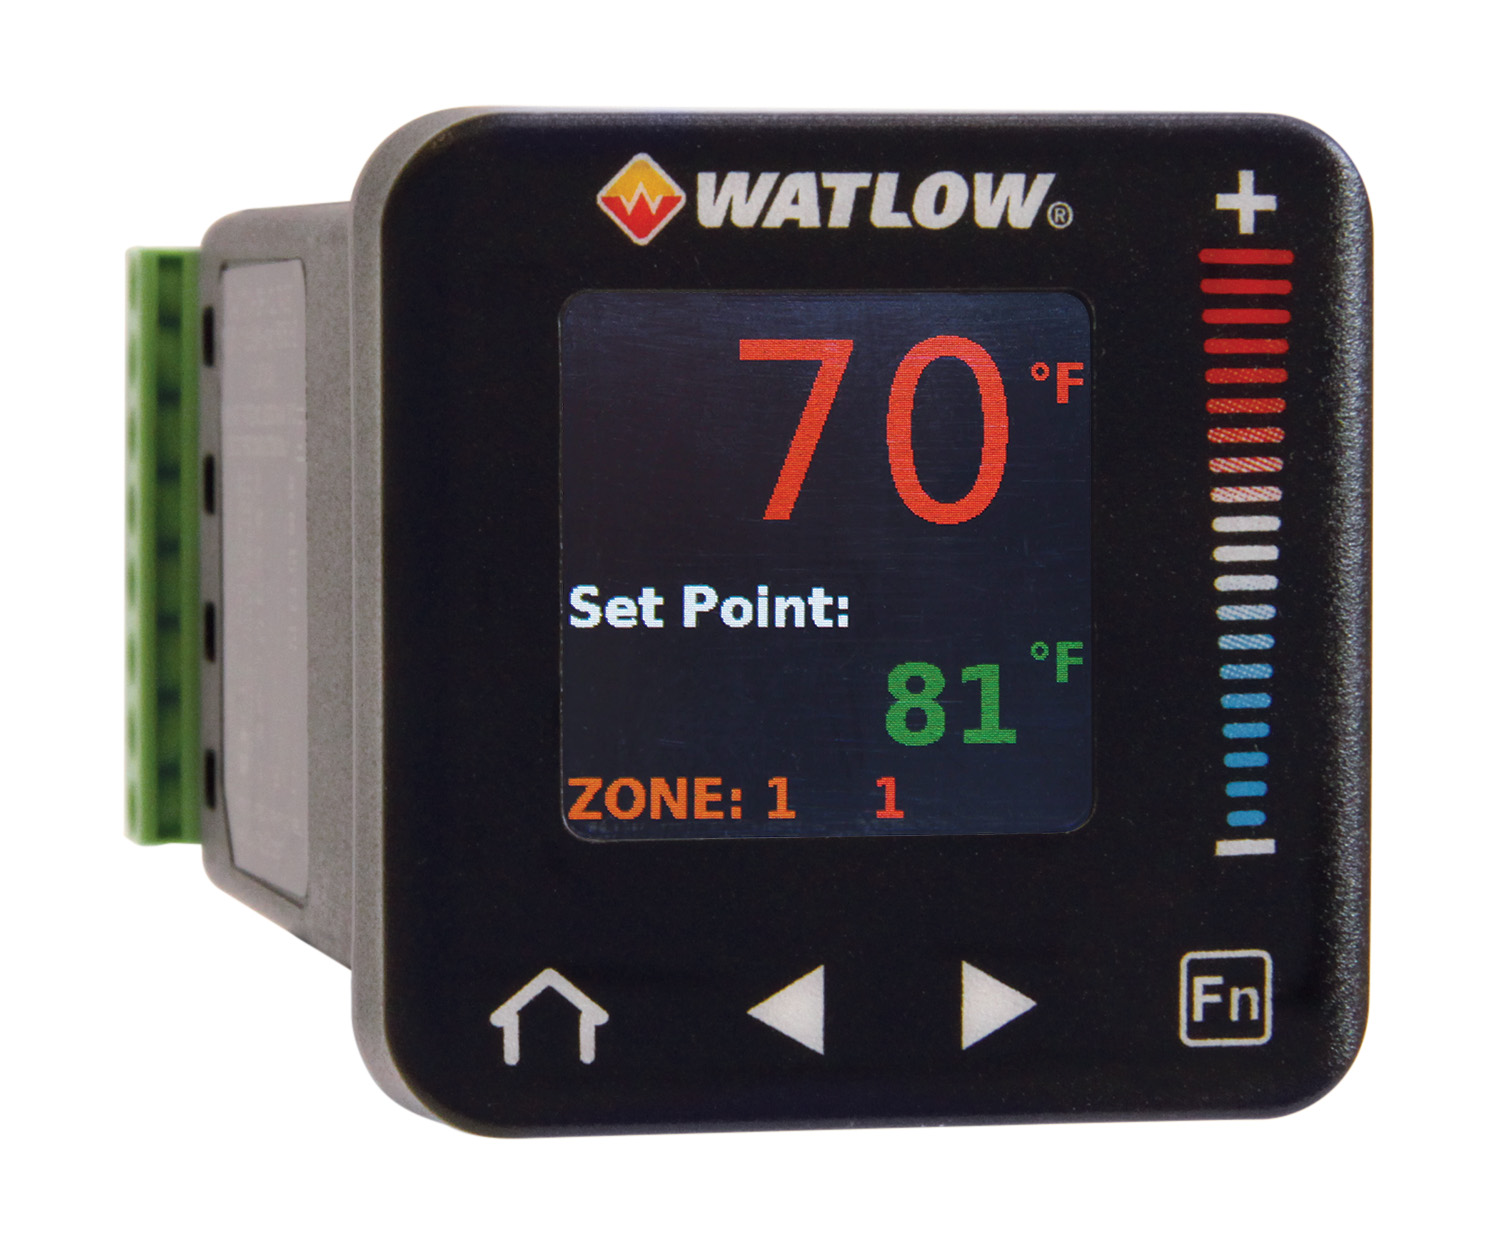 Watlow advanced electric thermal solutions: smaller, lighter and faster for greater patient safety